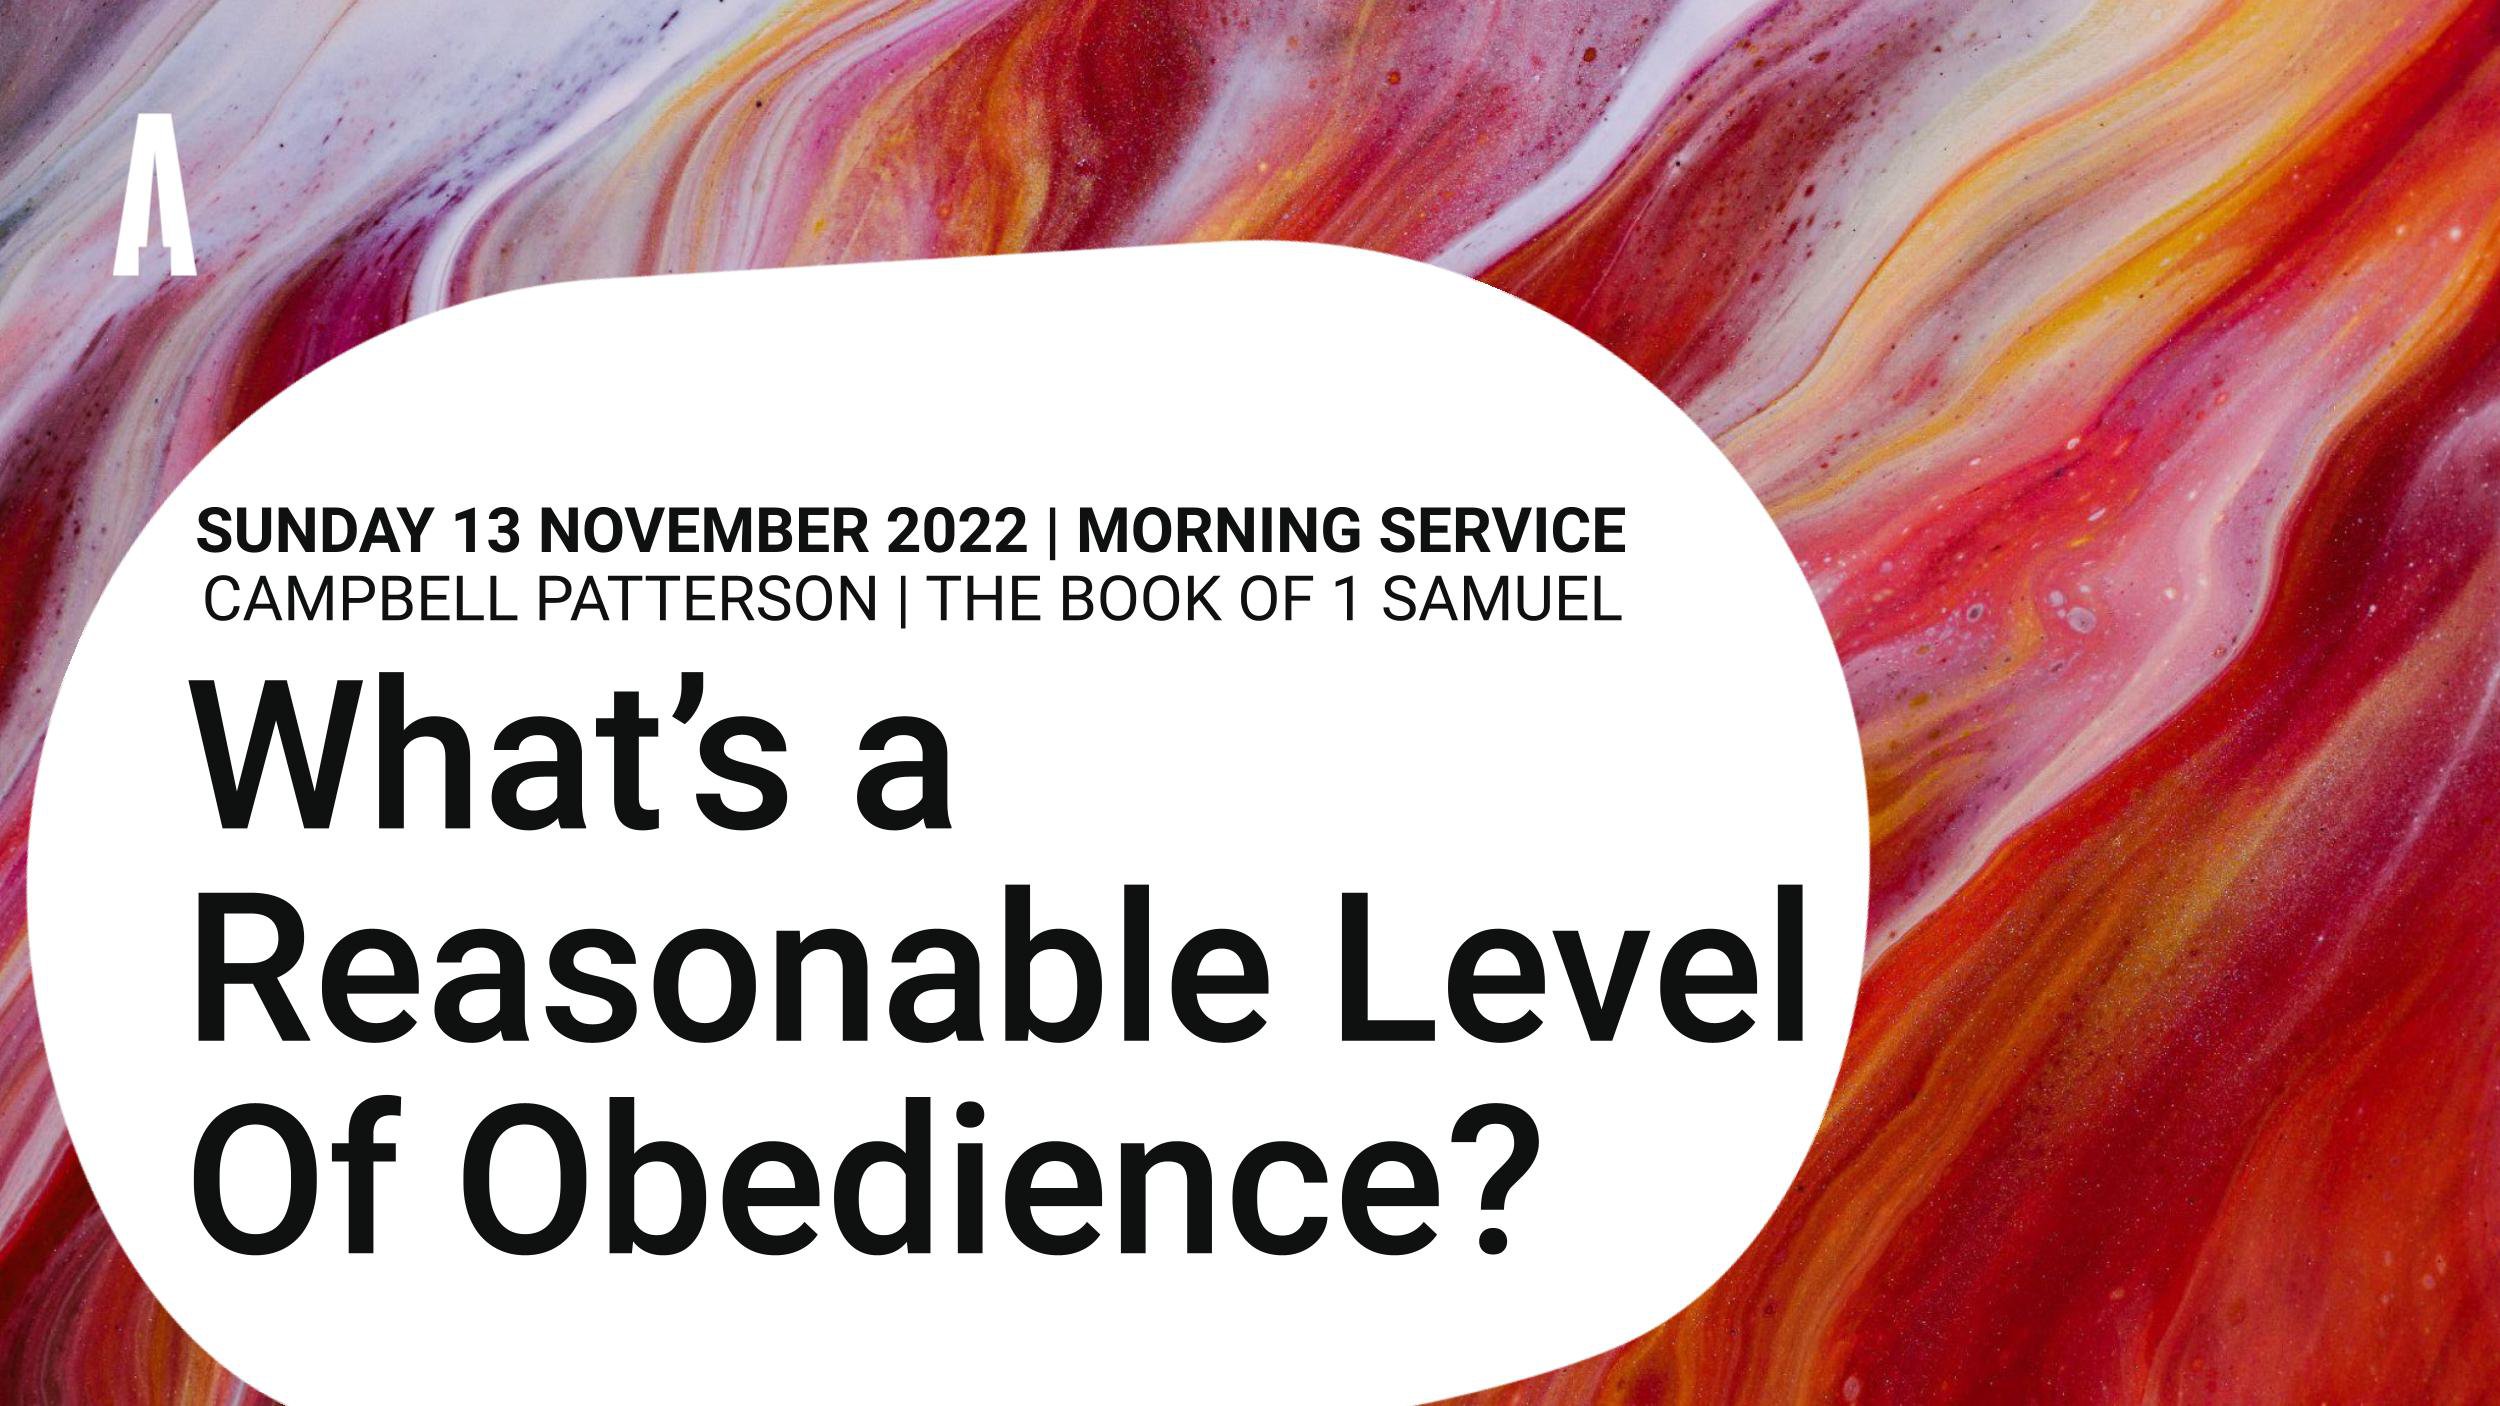 What's a Reasonable Level Of Obedience?